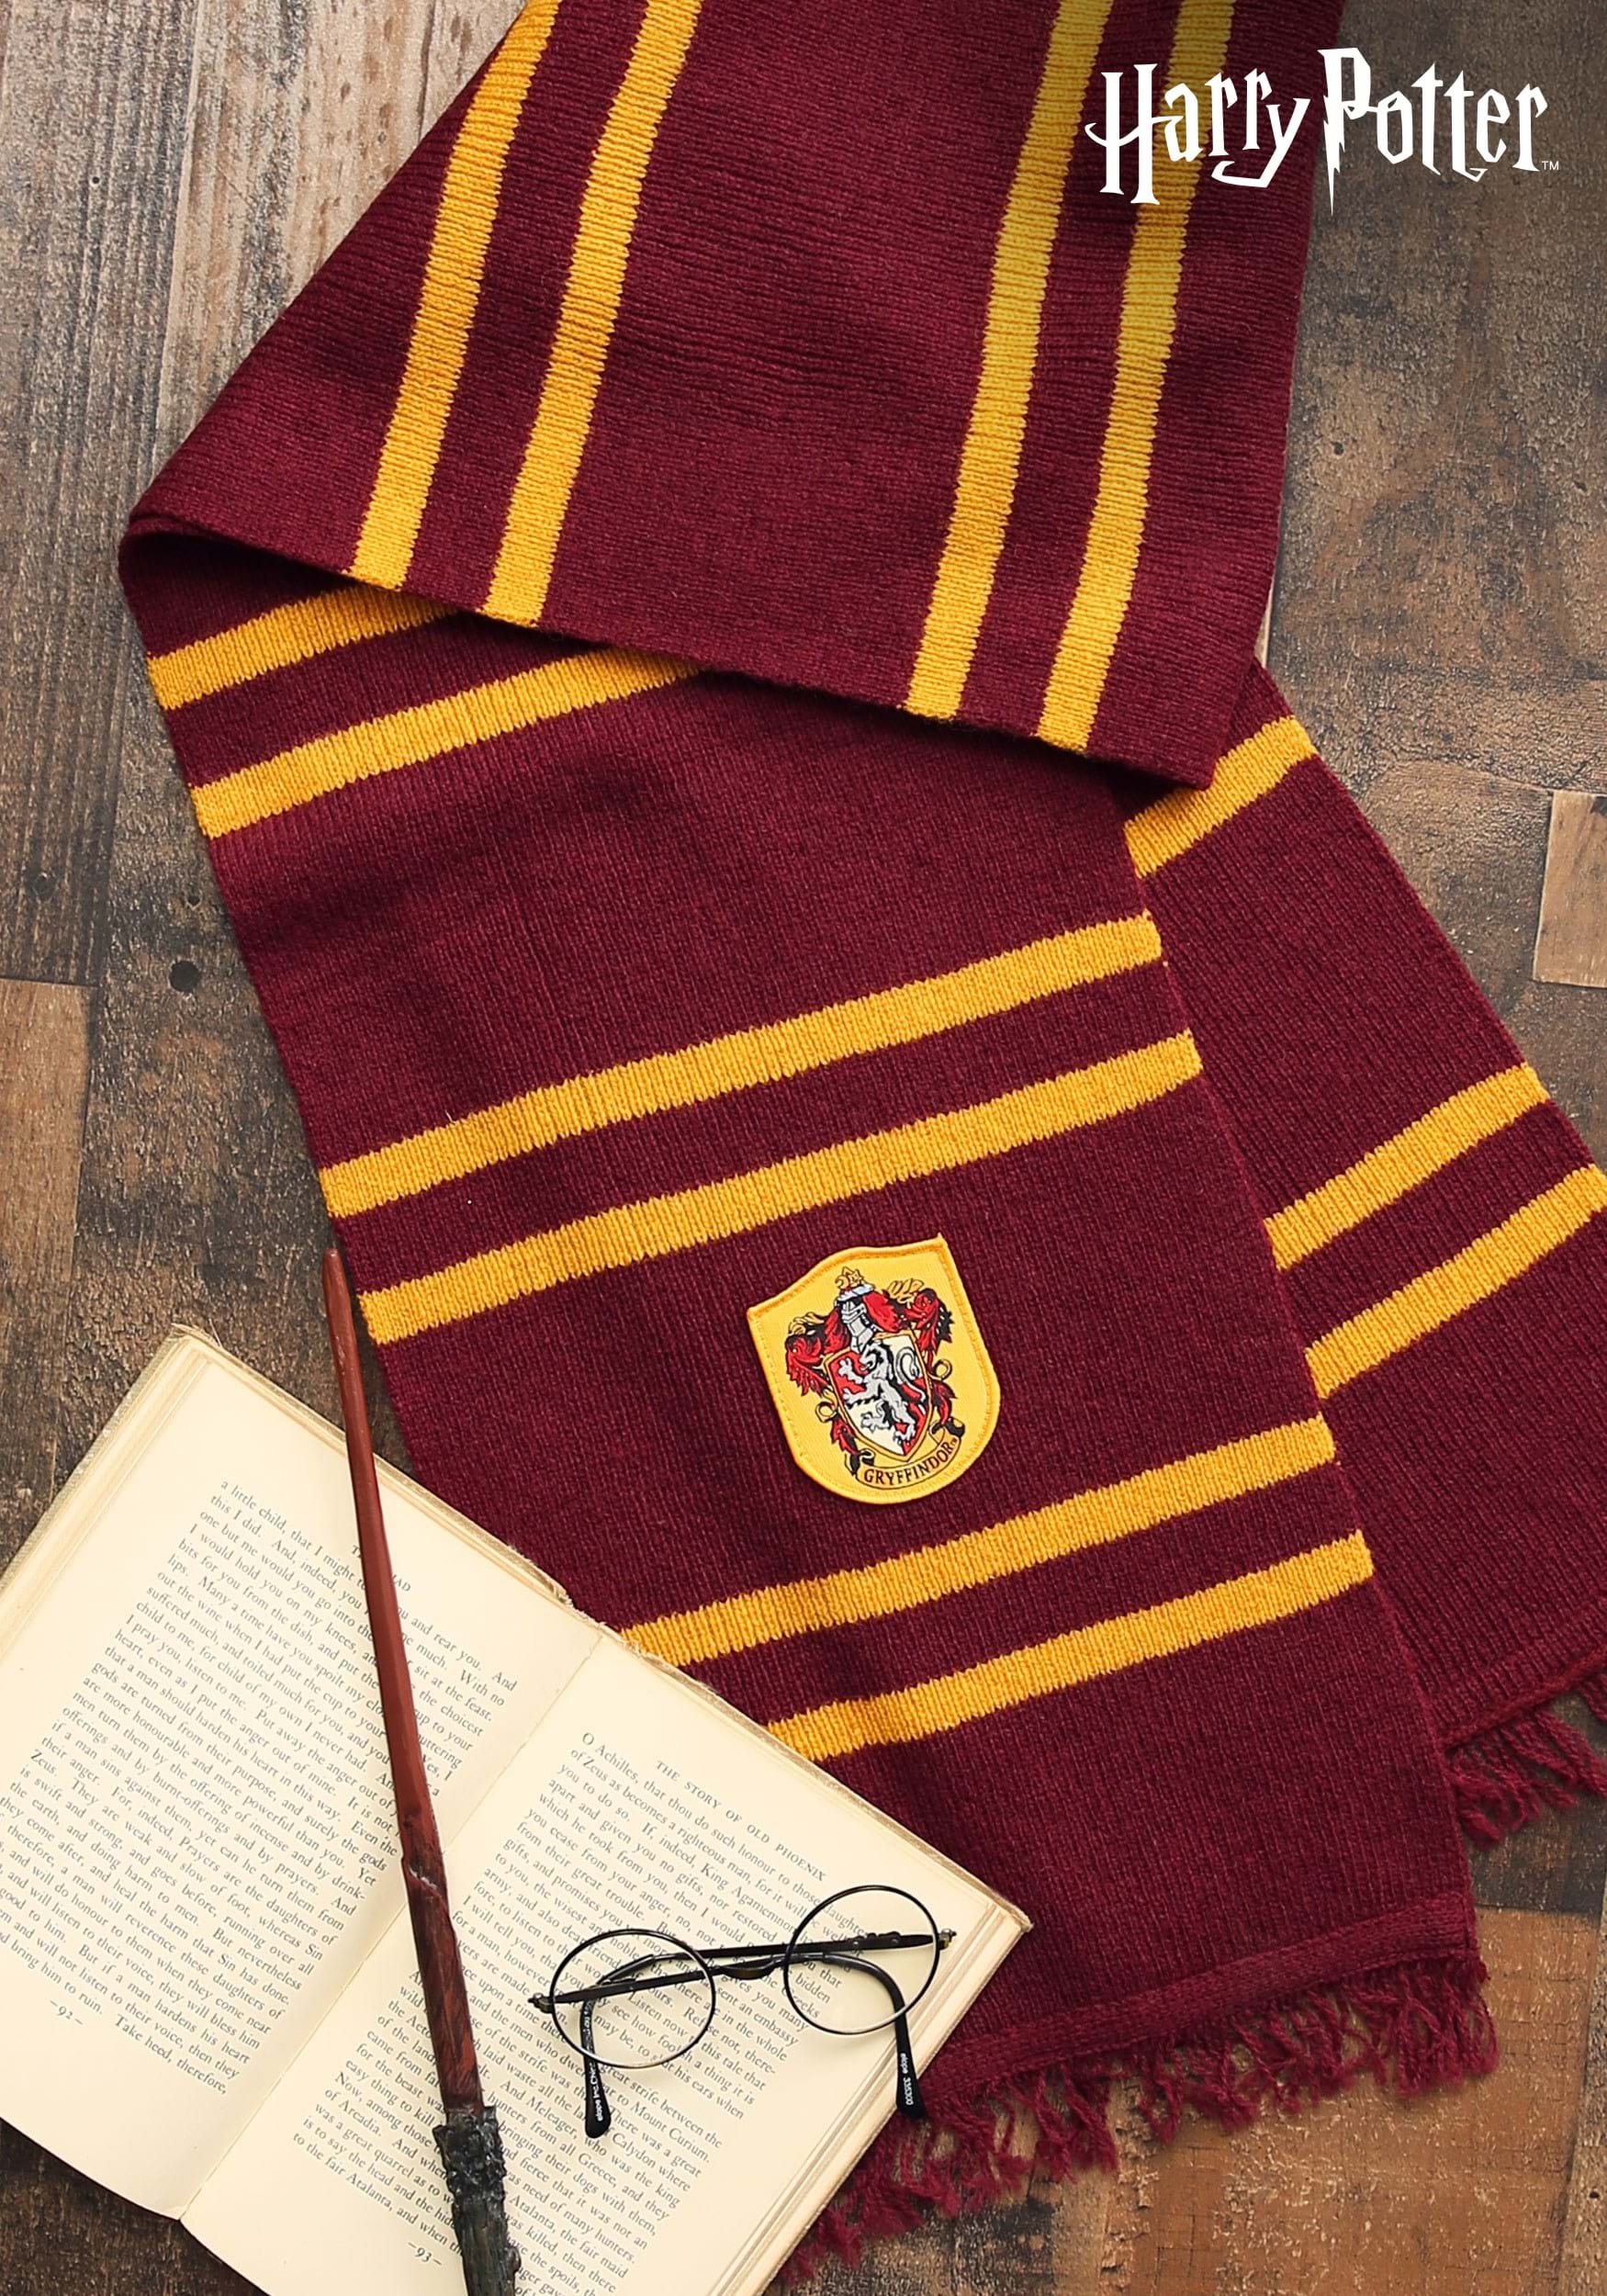 https://images.fun.com/products/3539/1-1/harry-potter-gryffindor-wool-scarf-update.jpg